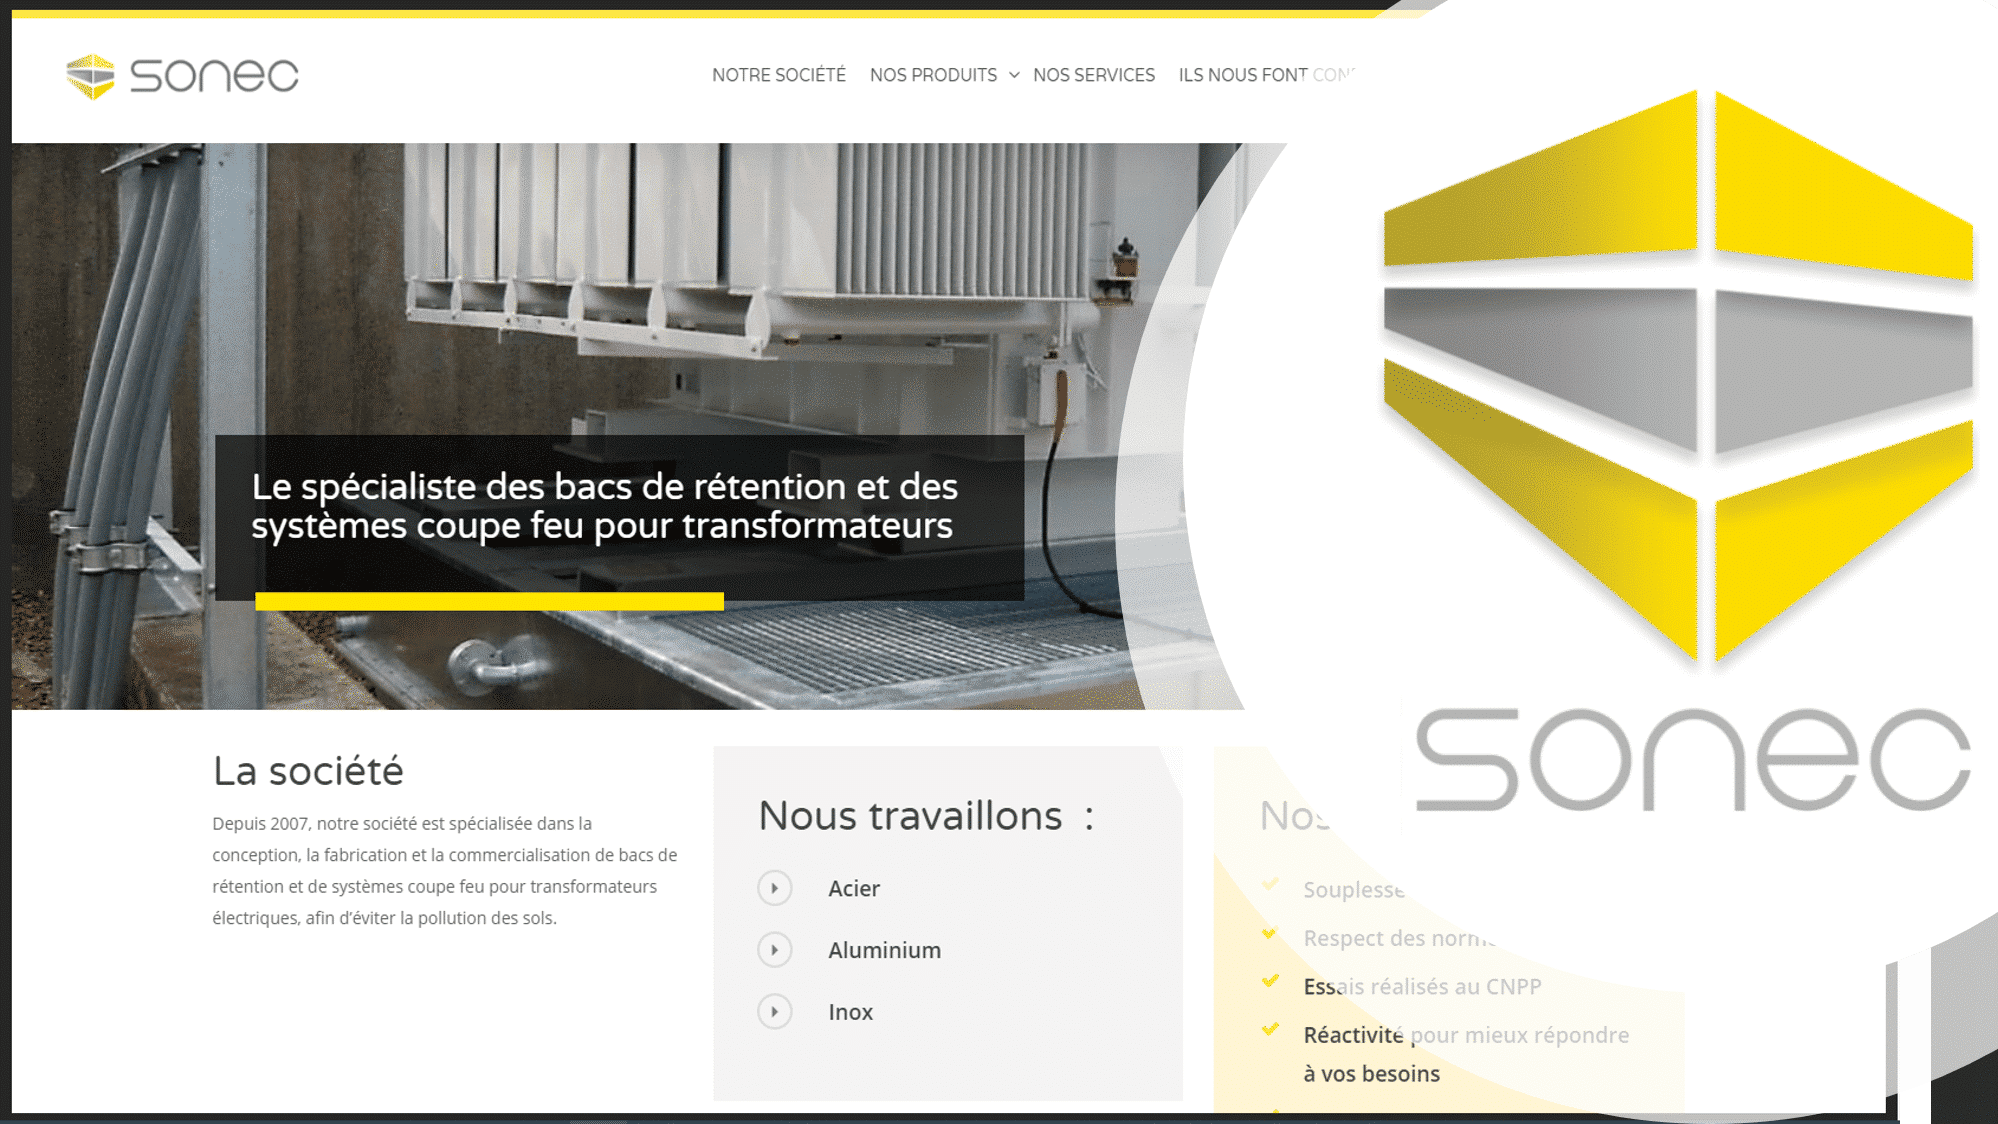 End of 2018 SANERGRID proceeded to the acquisition of SONEC